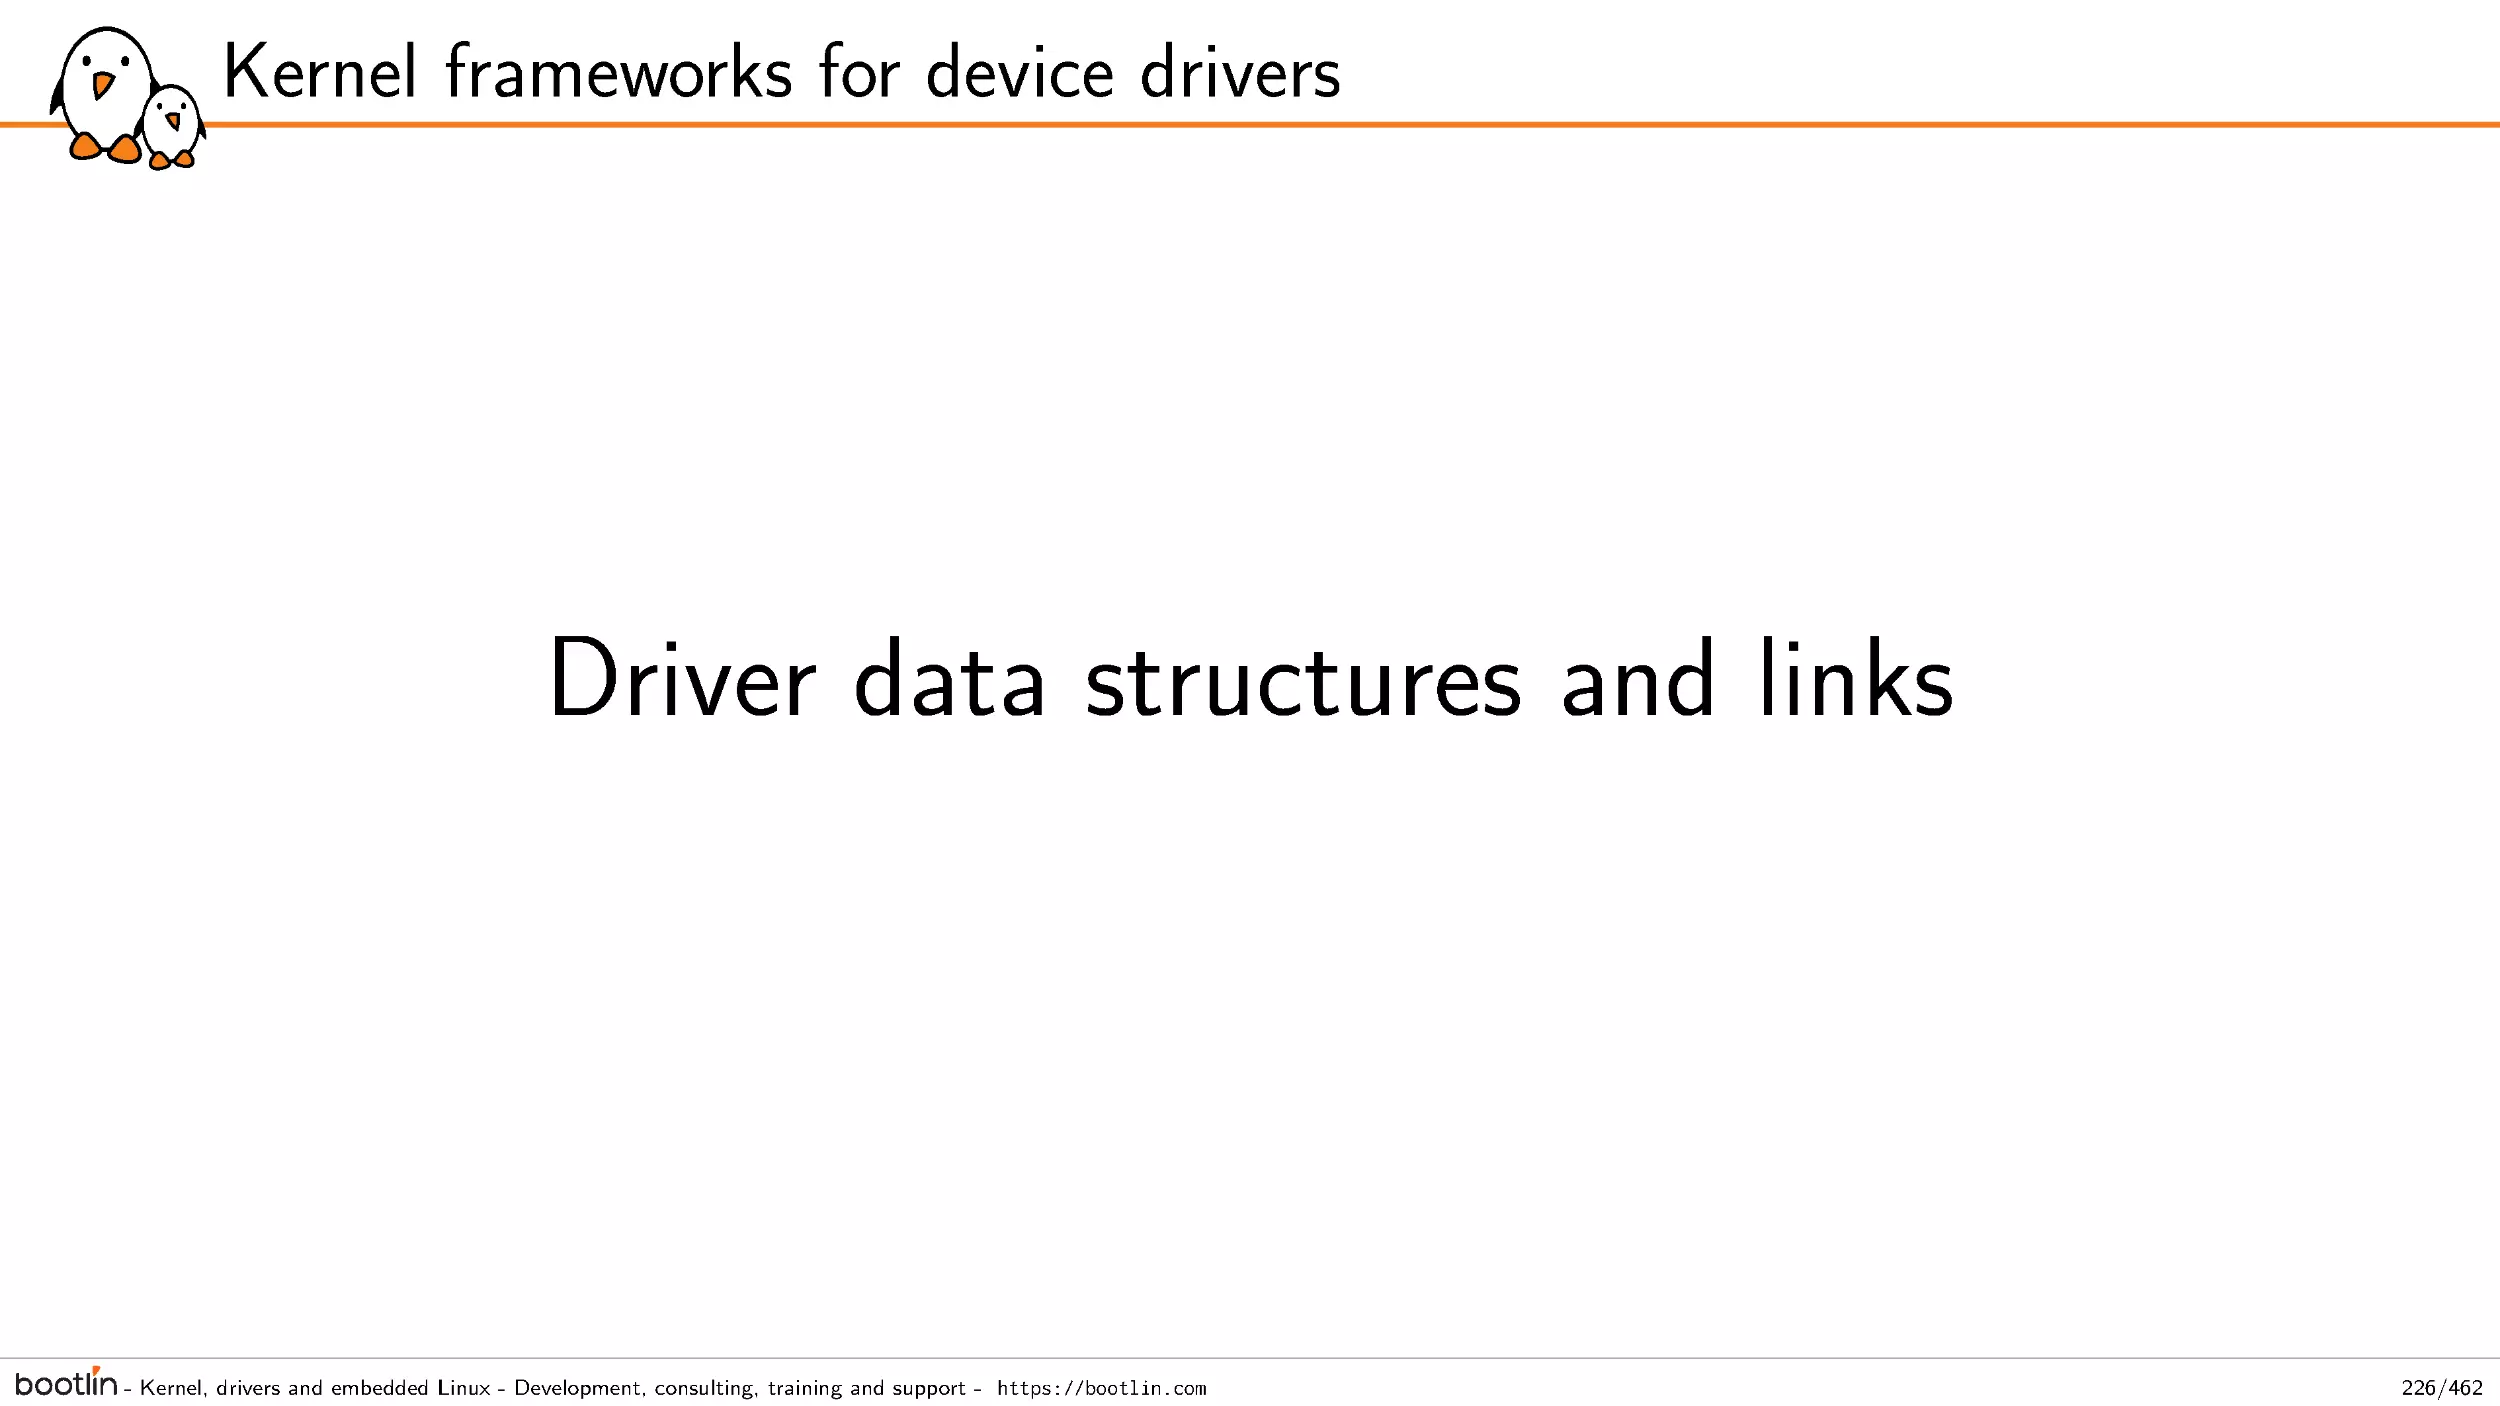 Driver data structures and links